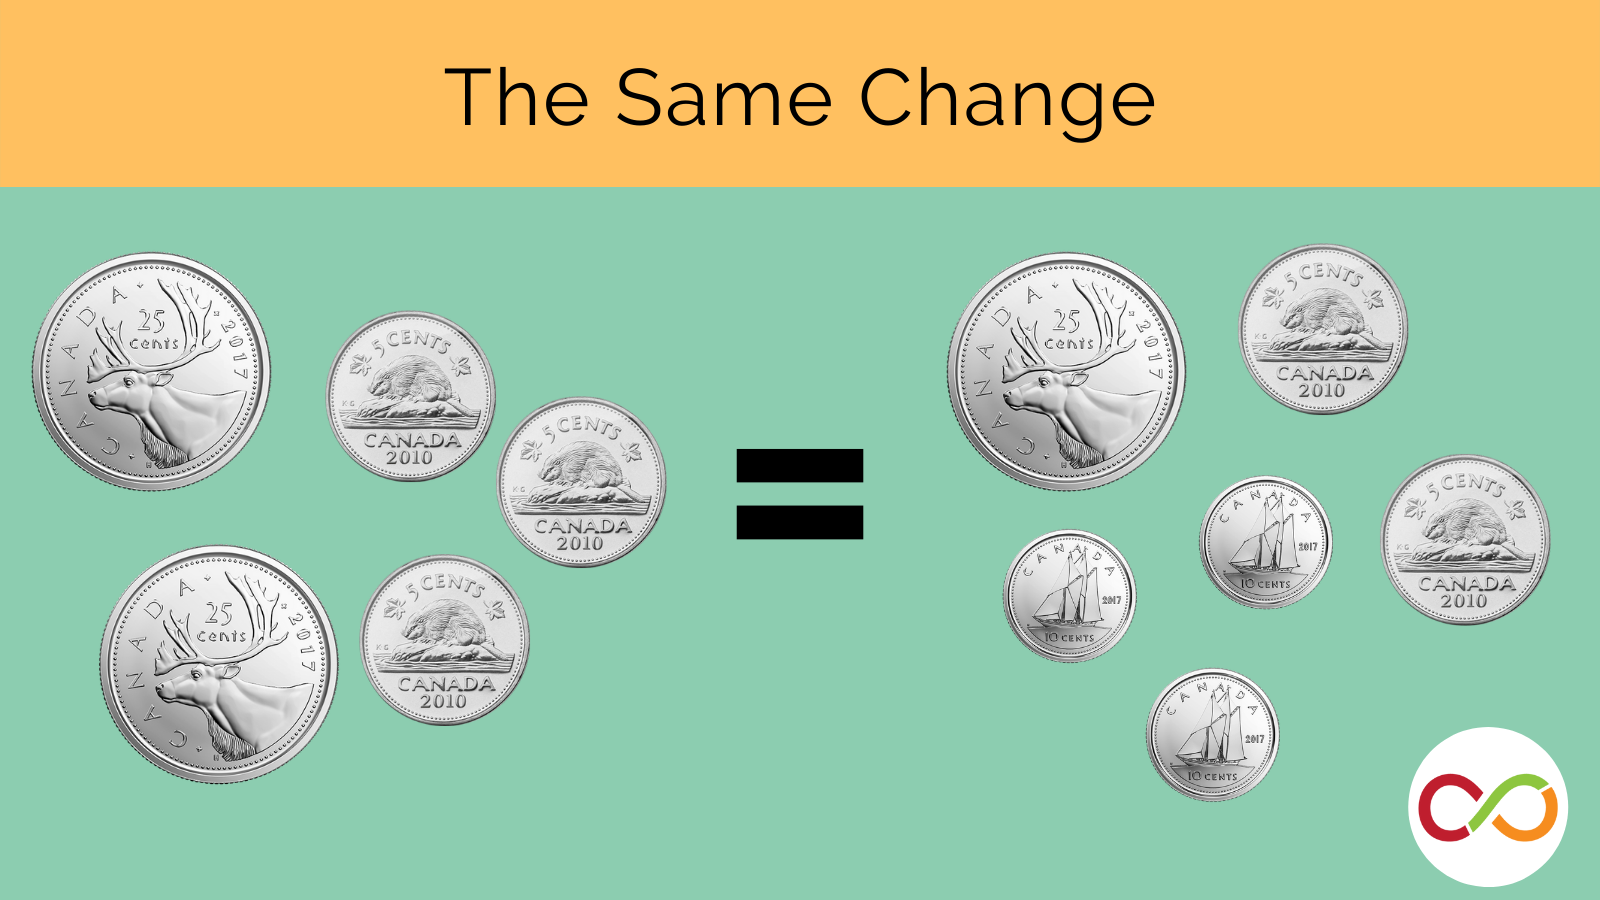 An image linking to the same change lesson